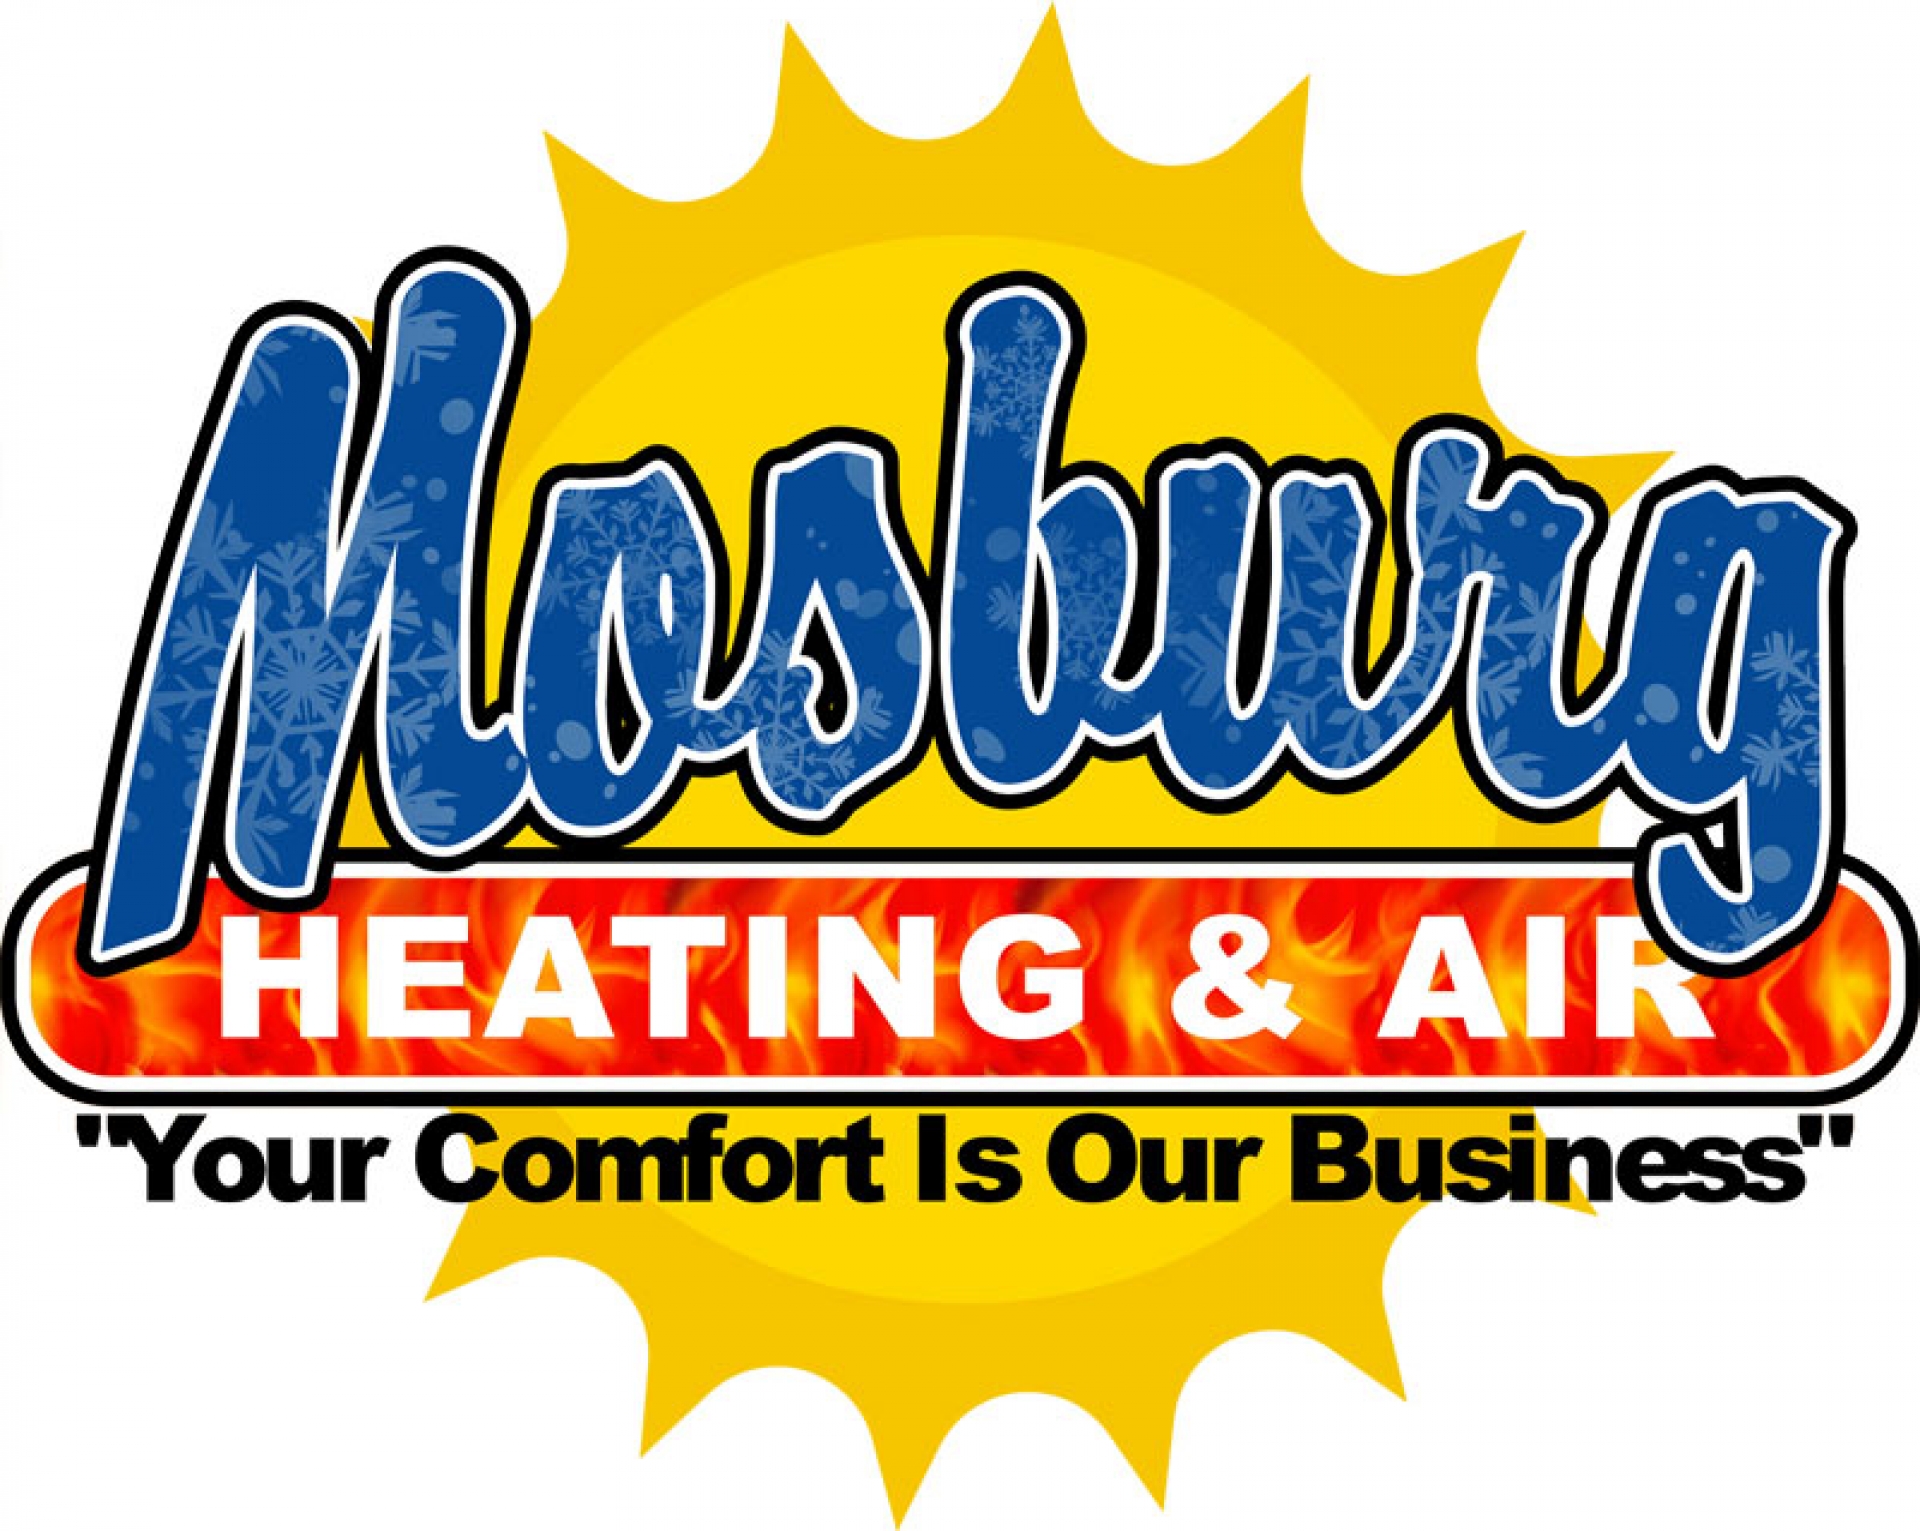 mosburg-heating-air-clean-energy-connection